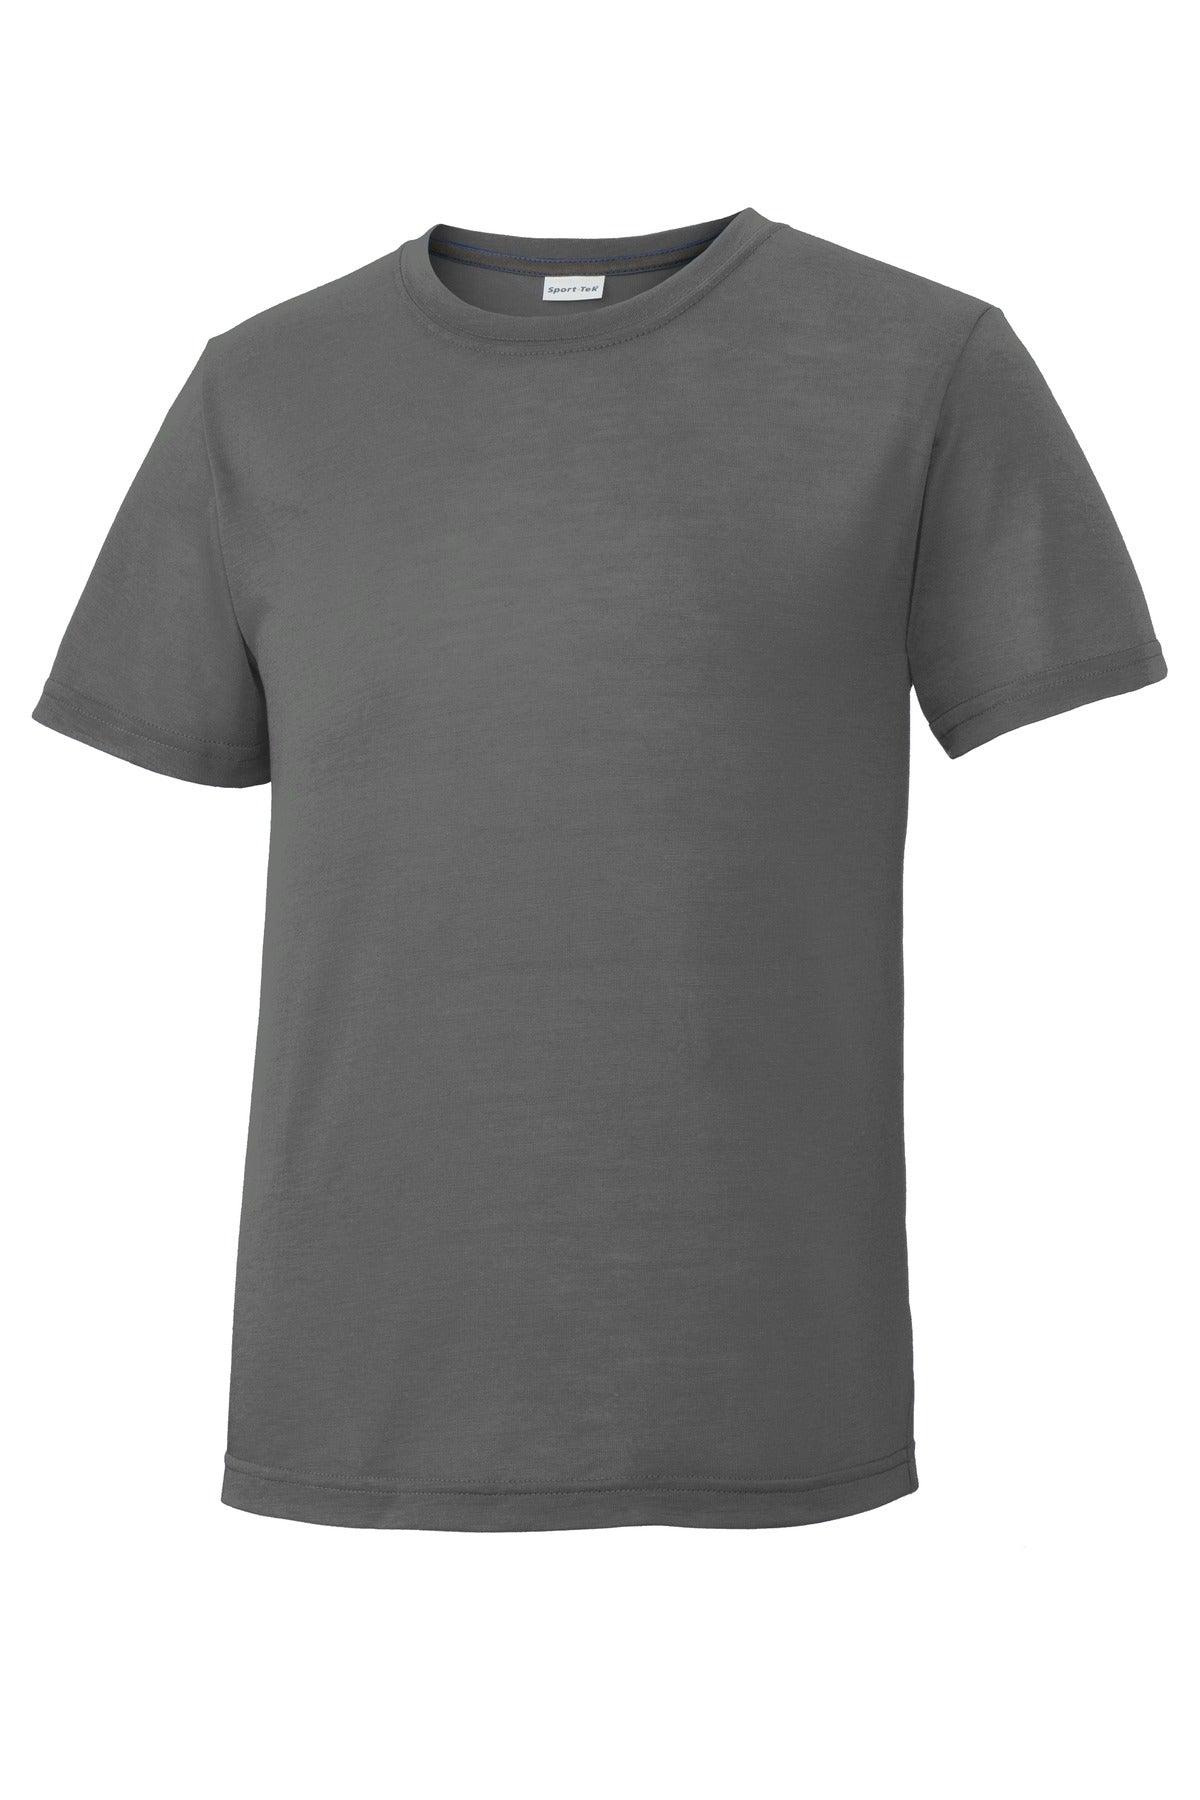 Sport-Tek Youth PosiCharge Competitor Cotton Touch Tee. YST450 - Dresses Max